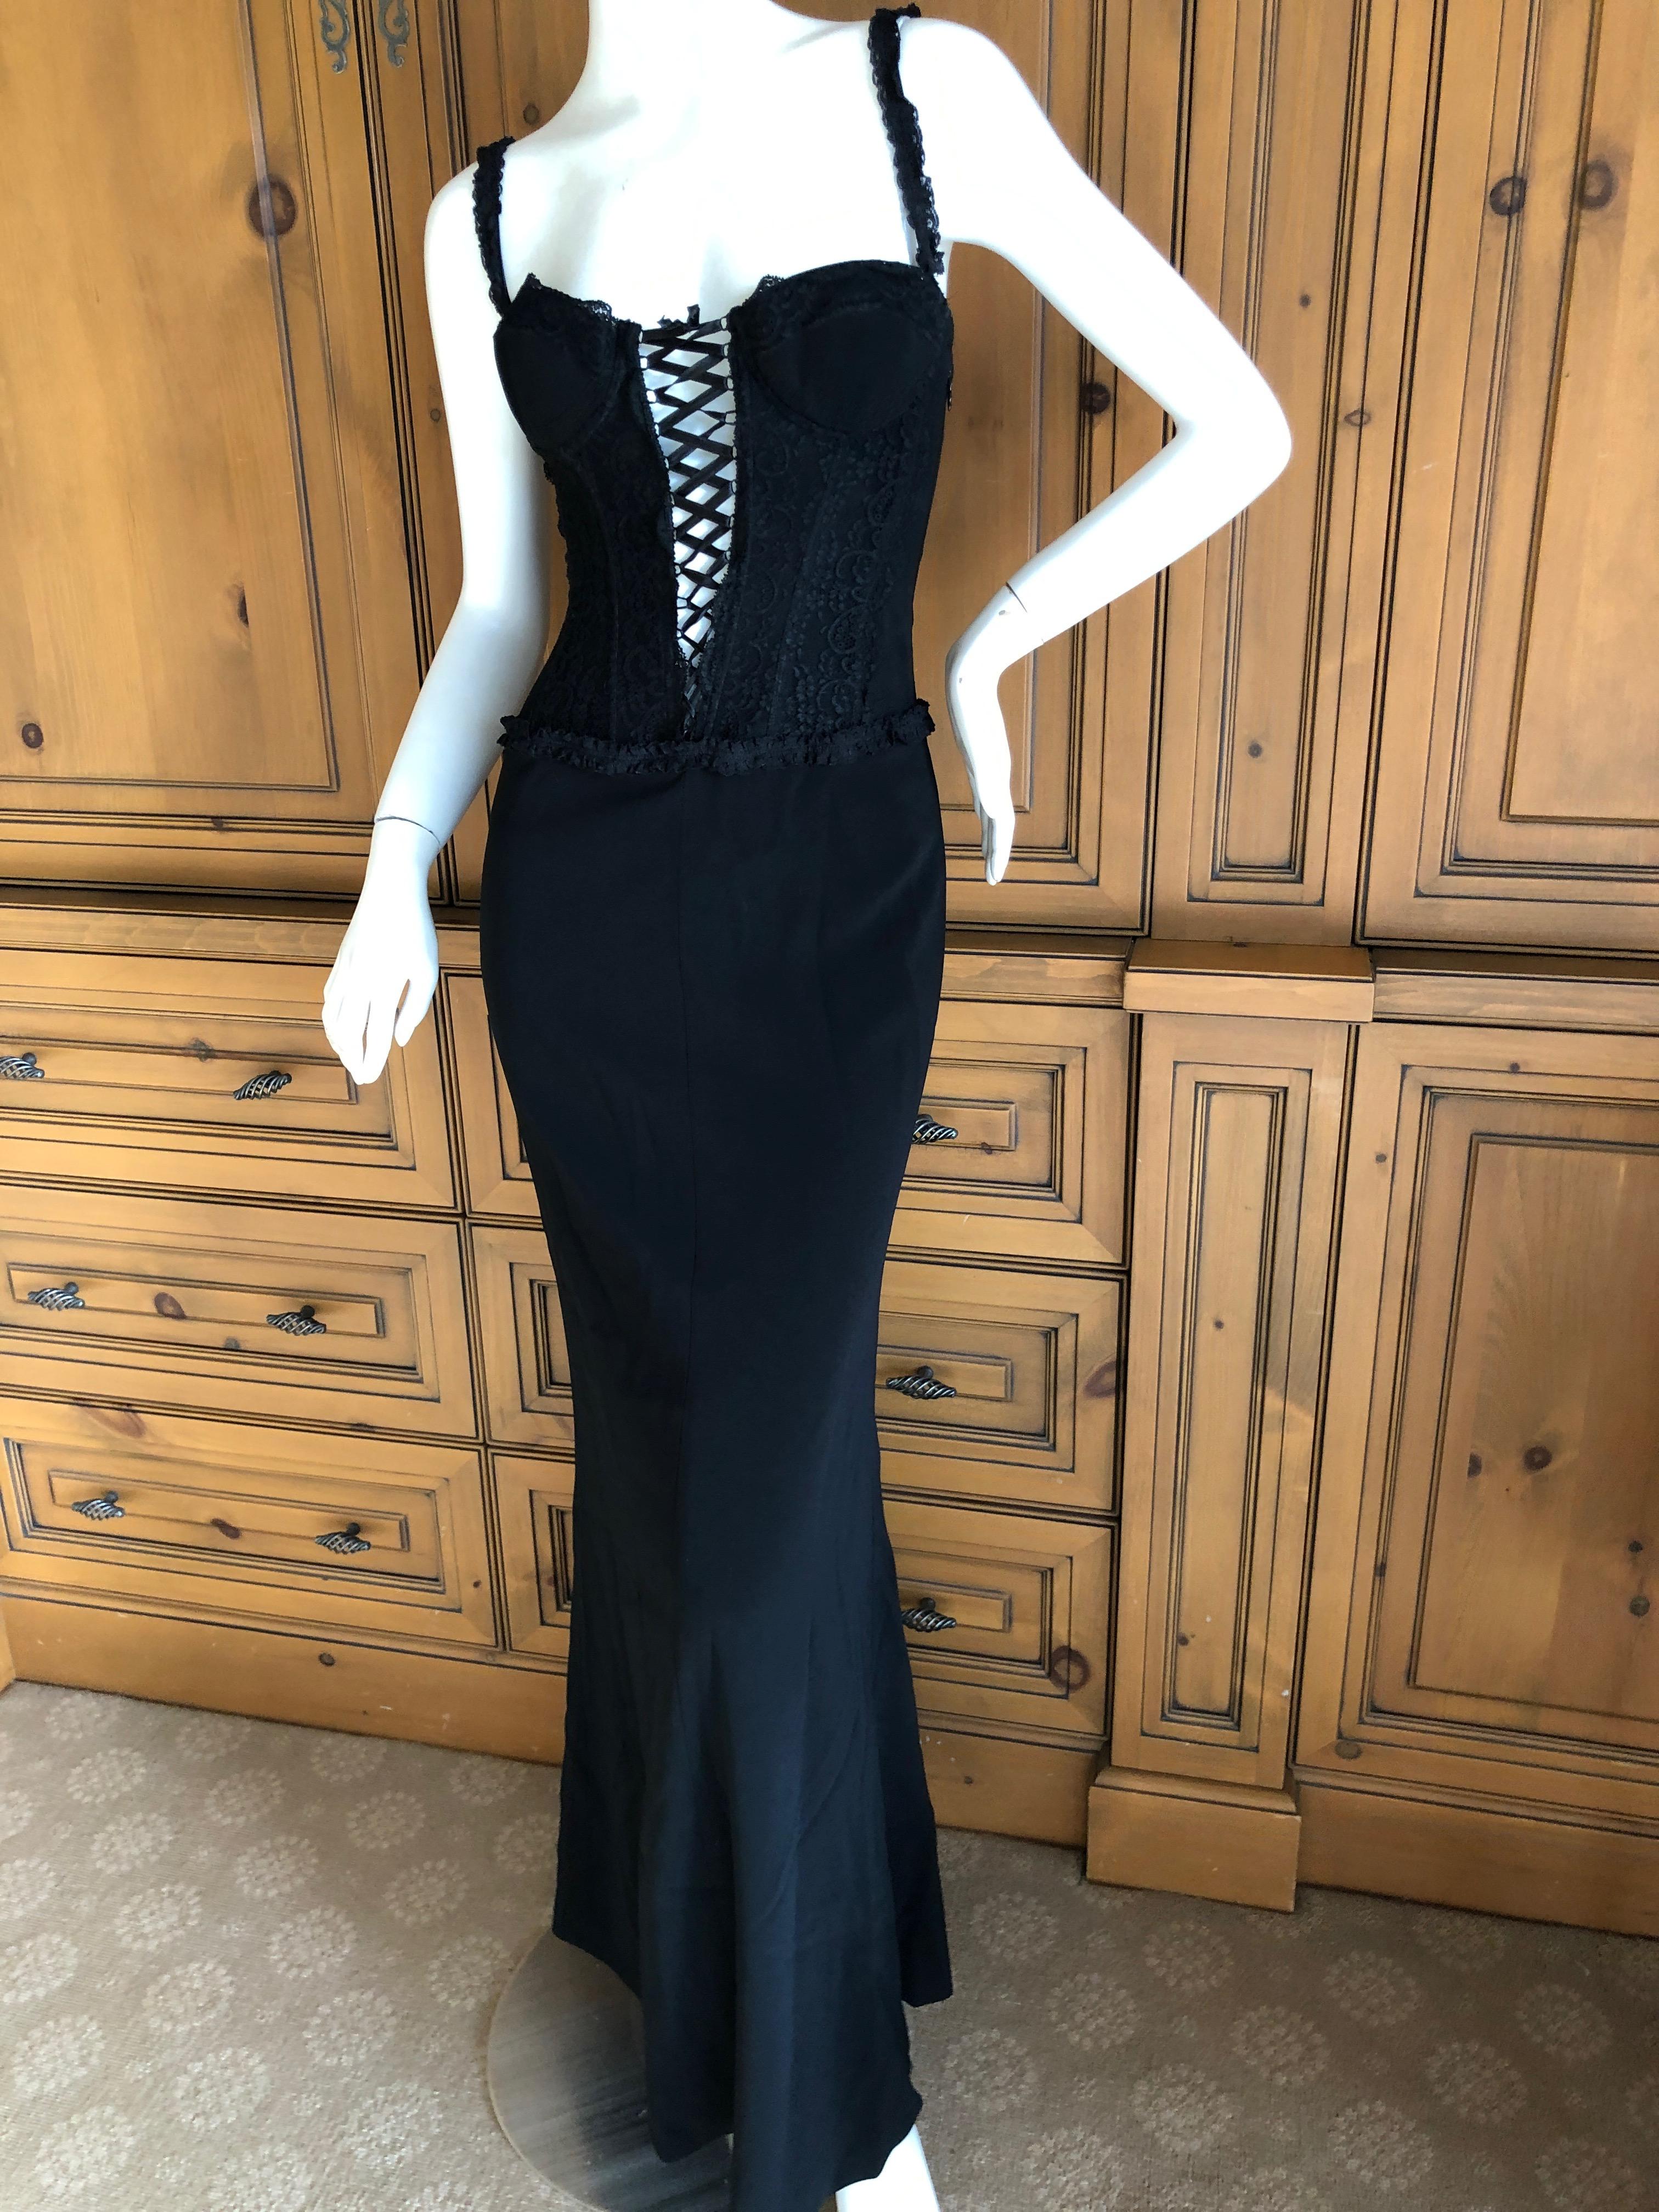 Moschino Cheap & Chic Vintage 1980's Plunging Corset Lace Evening Dress For Sale 5